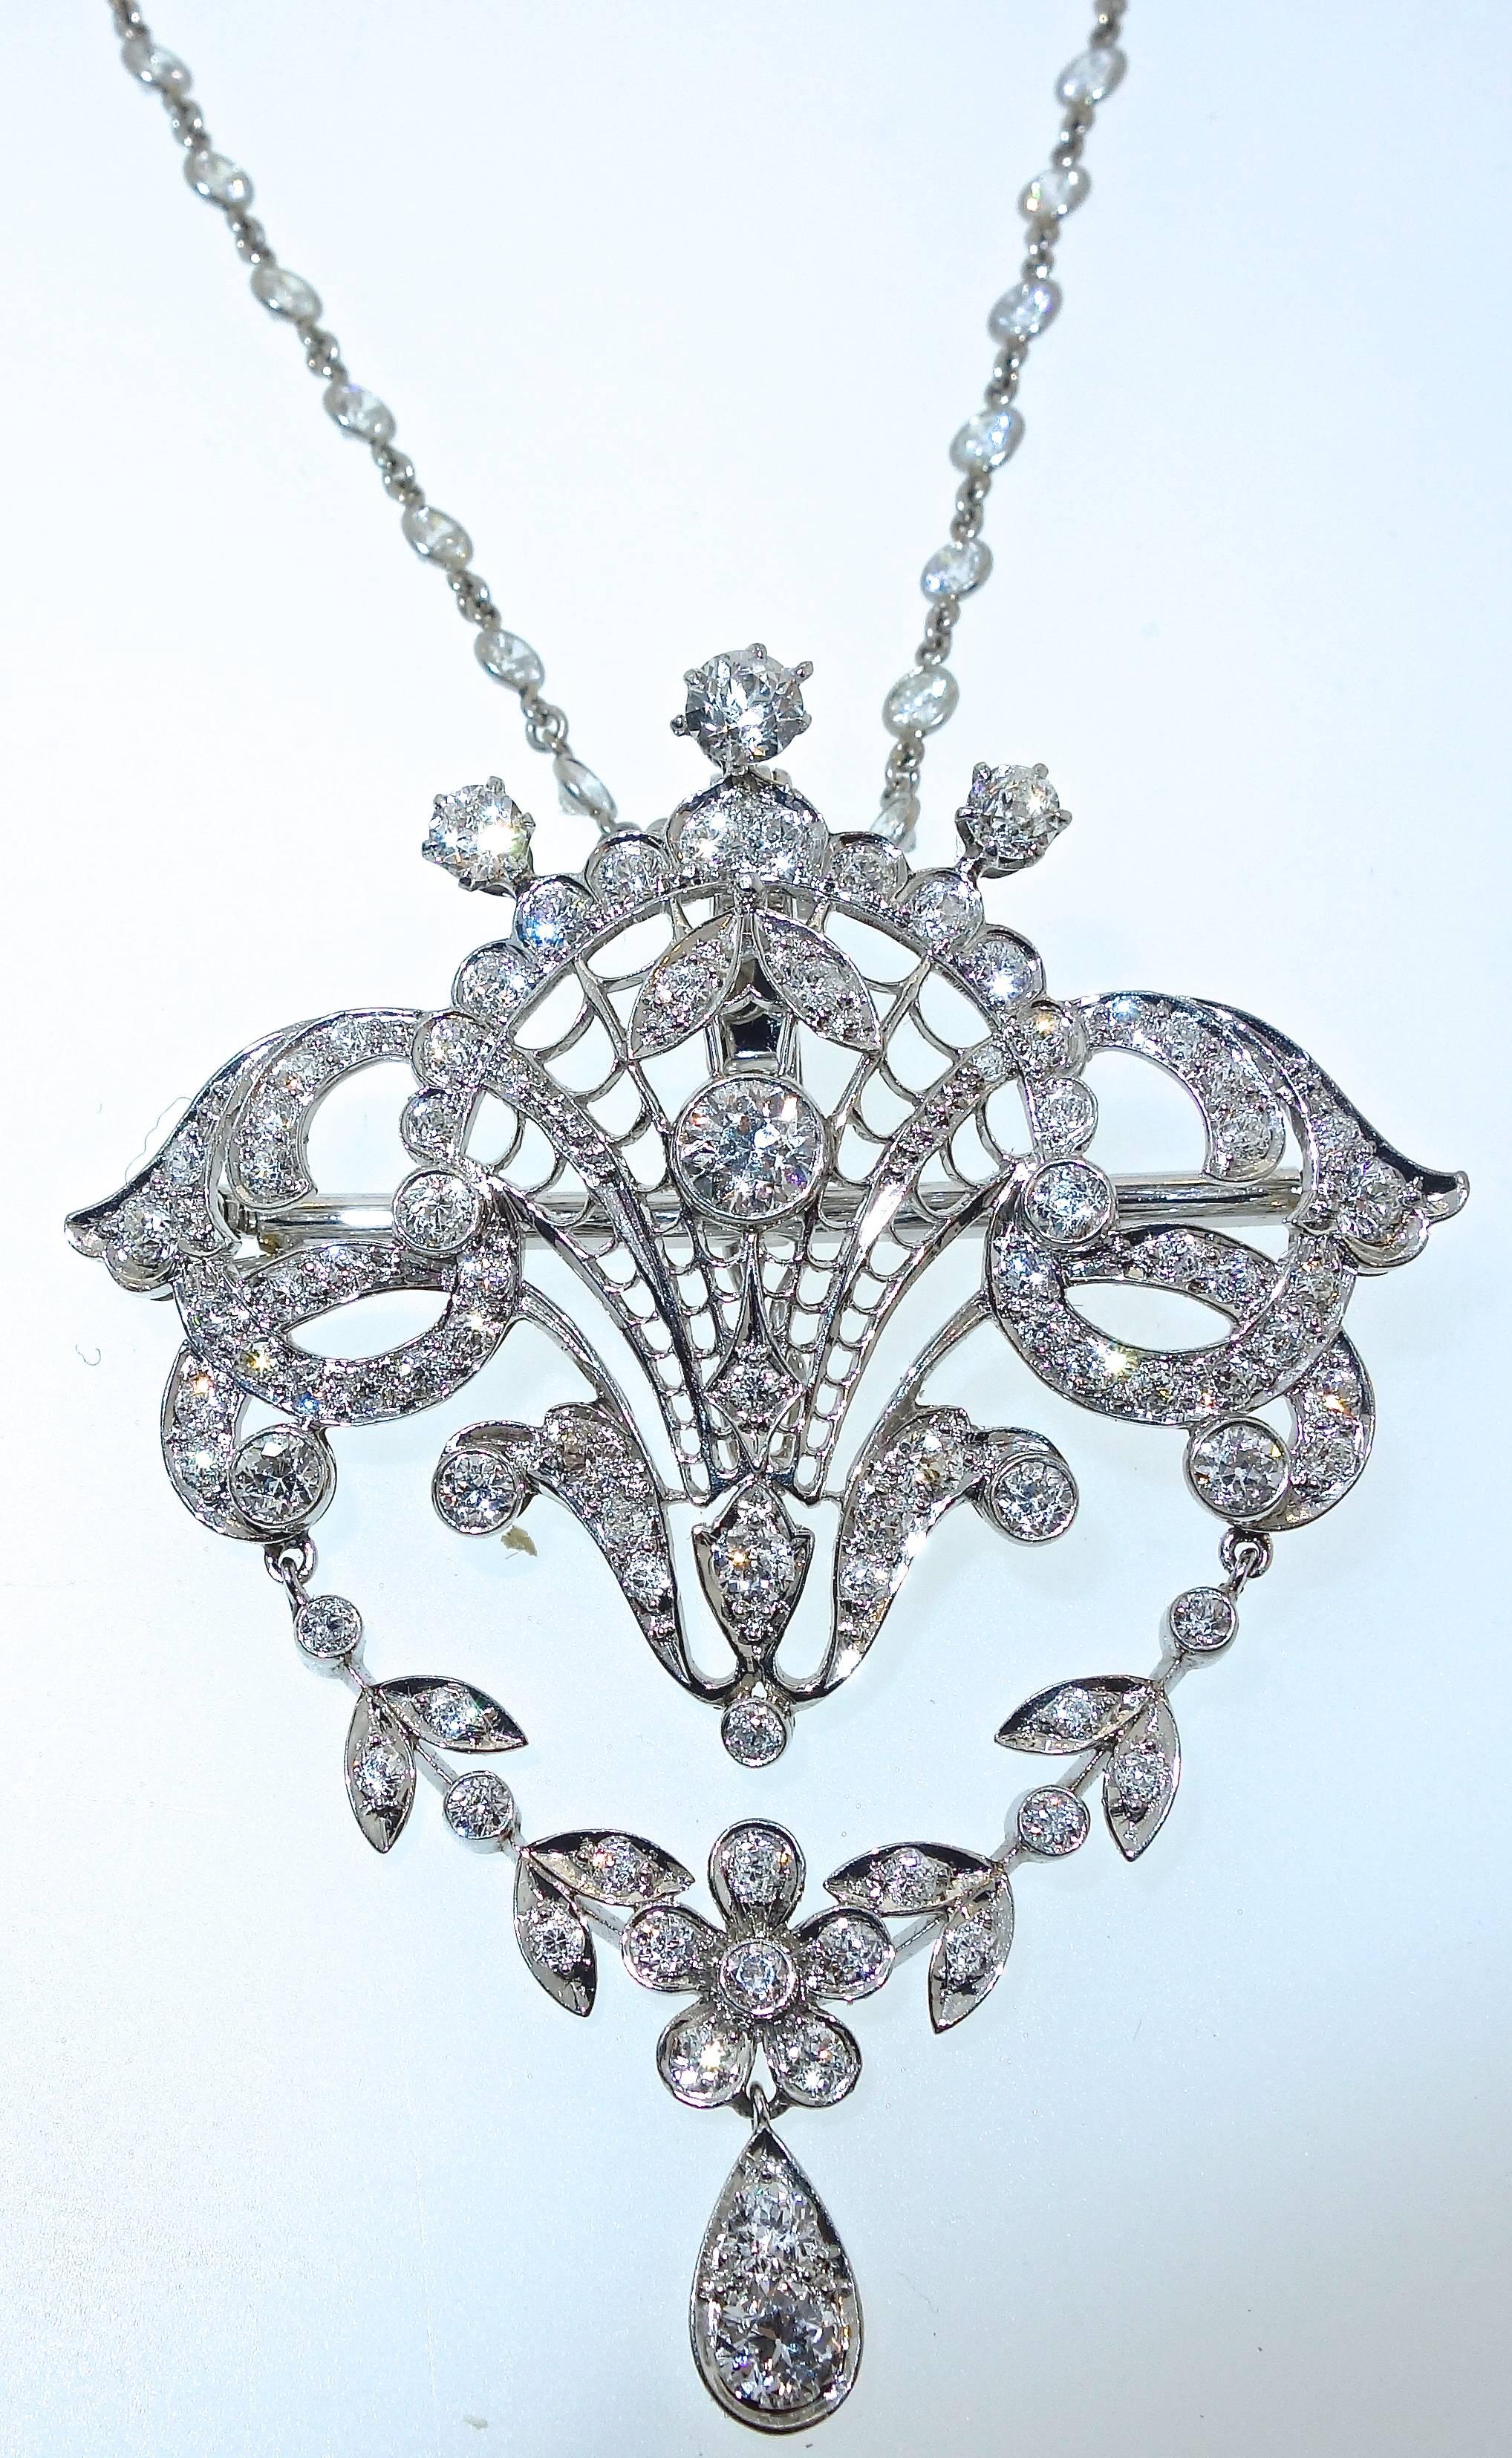 The diamonds are a bright white and very slightly included.  This pendant has a classic garland motif - graceful and delicate yet unusual and stunning.  It is both a pendant and a necklace.  It suspends from a modern diamond necklace which has 5